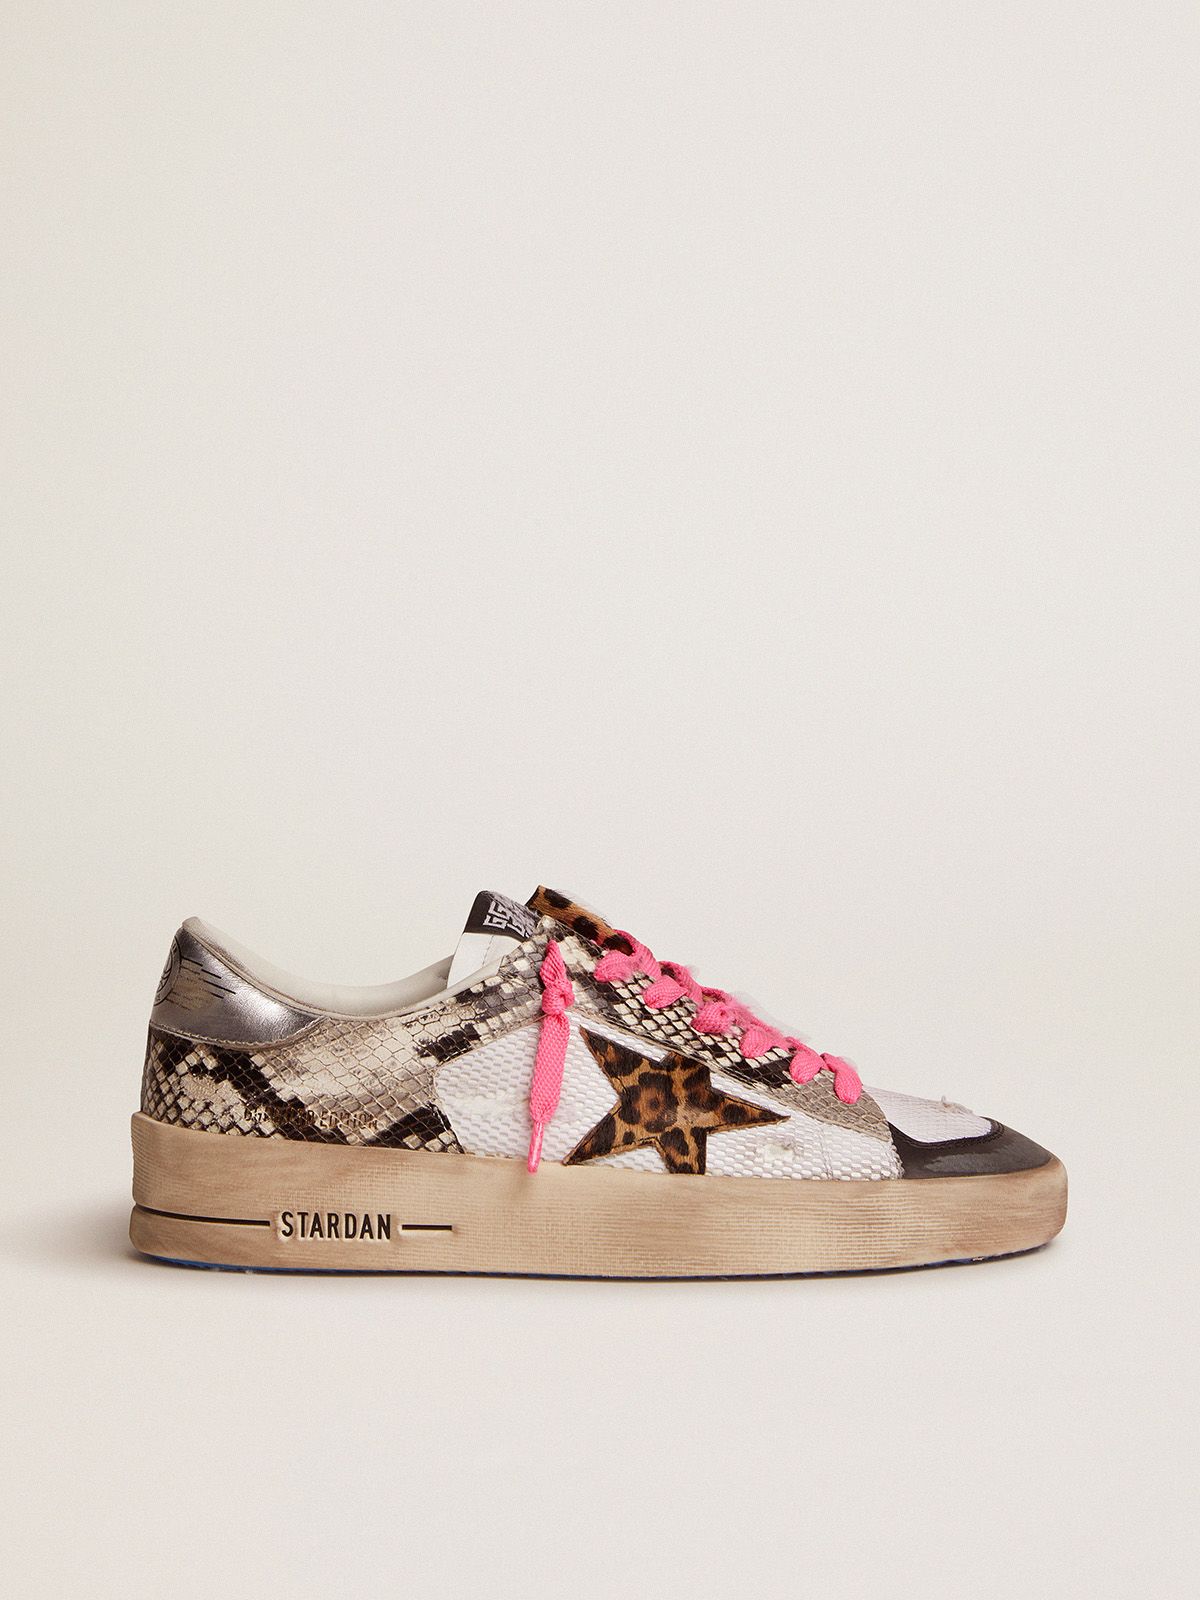 golden goose skin sneakers with upper LAB Stardan leopard-print pony and leather snake-print star